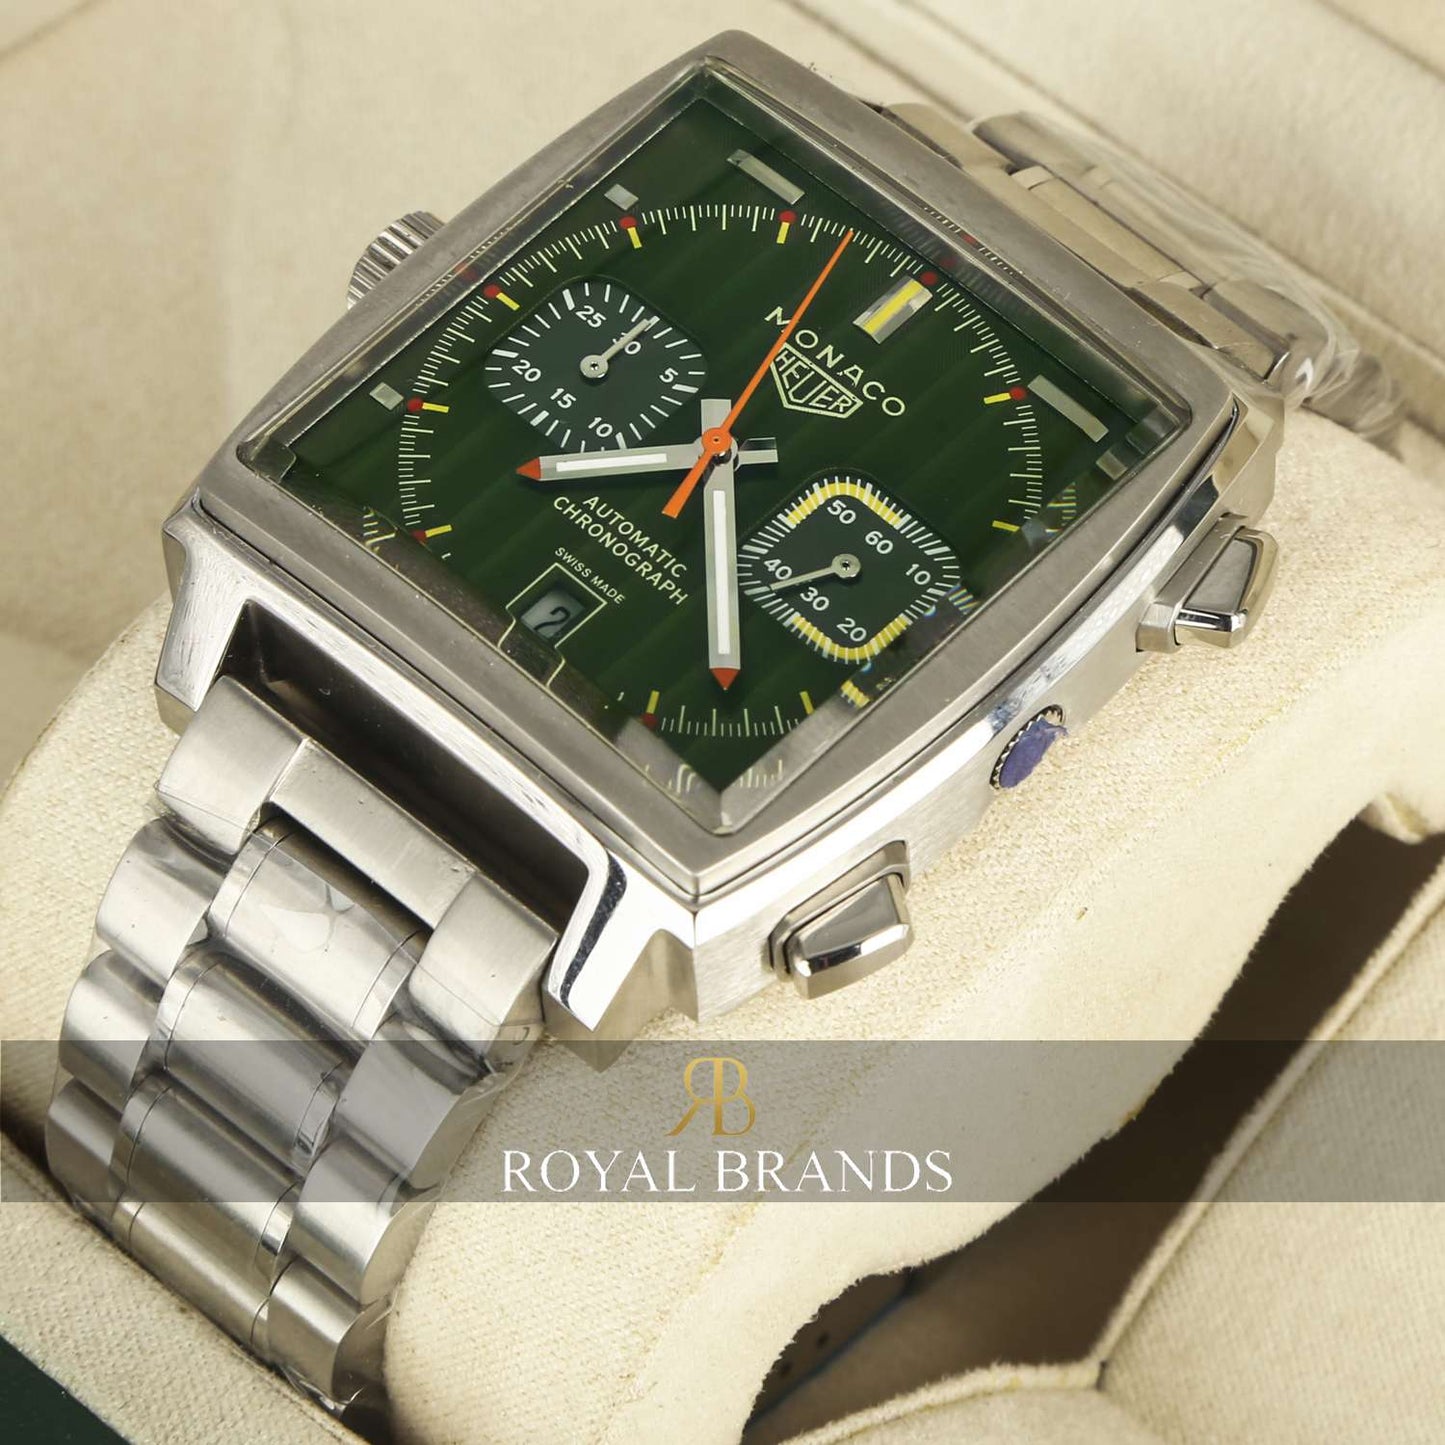 Latest collection Silver With Green Dial 1969-1979 Limited Edition Watch